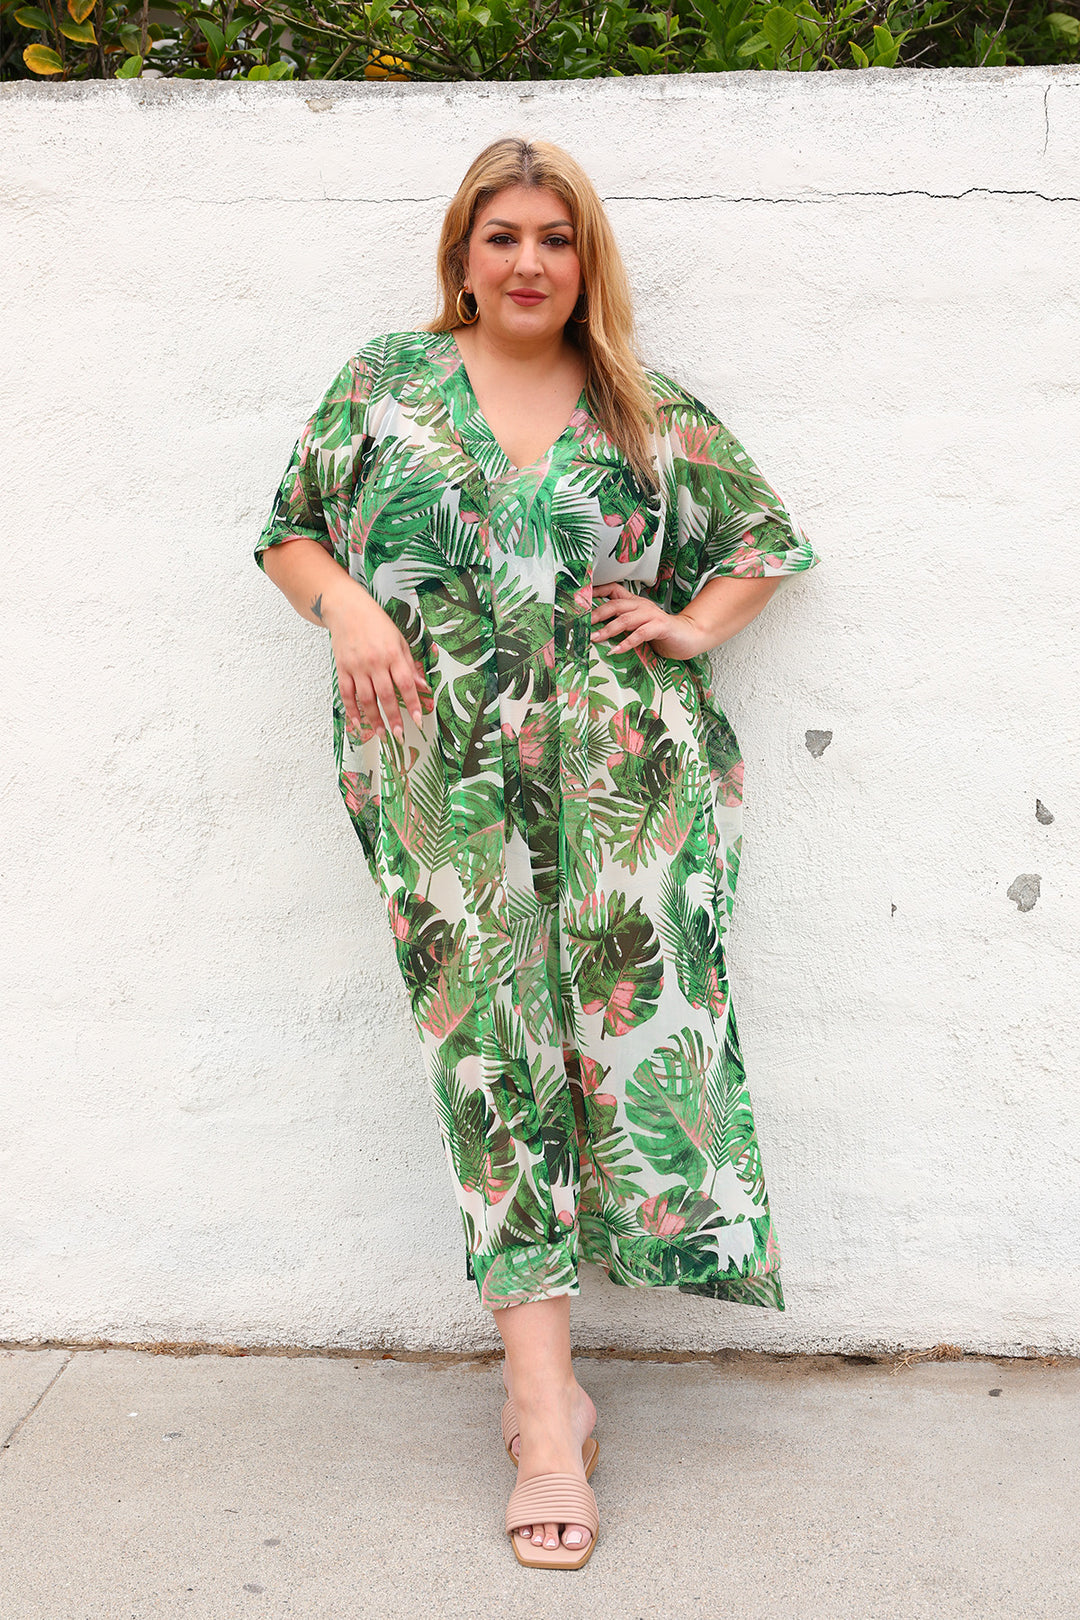 The Muse Caftan - Palm Mesh